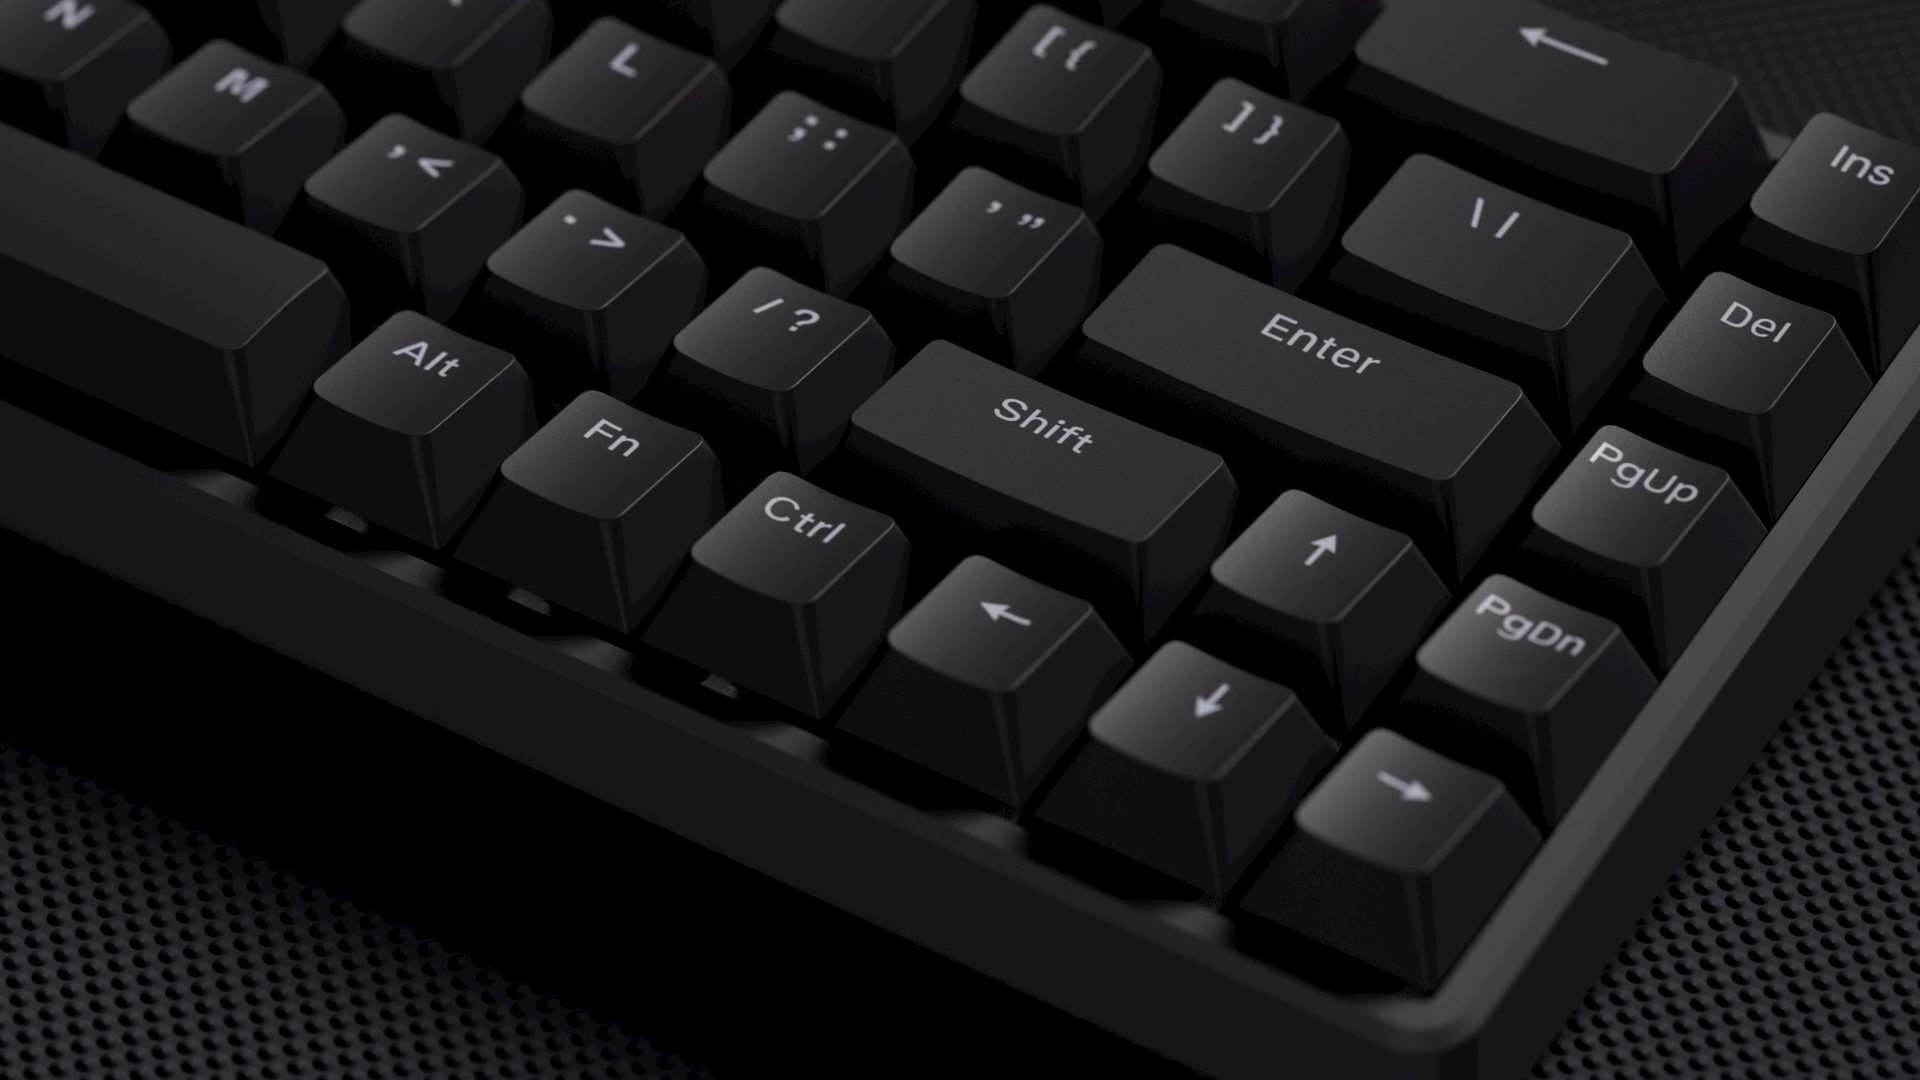 Magnetic Switch Keyboard? What Kind of Keyboard is That?